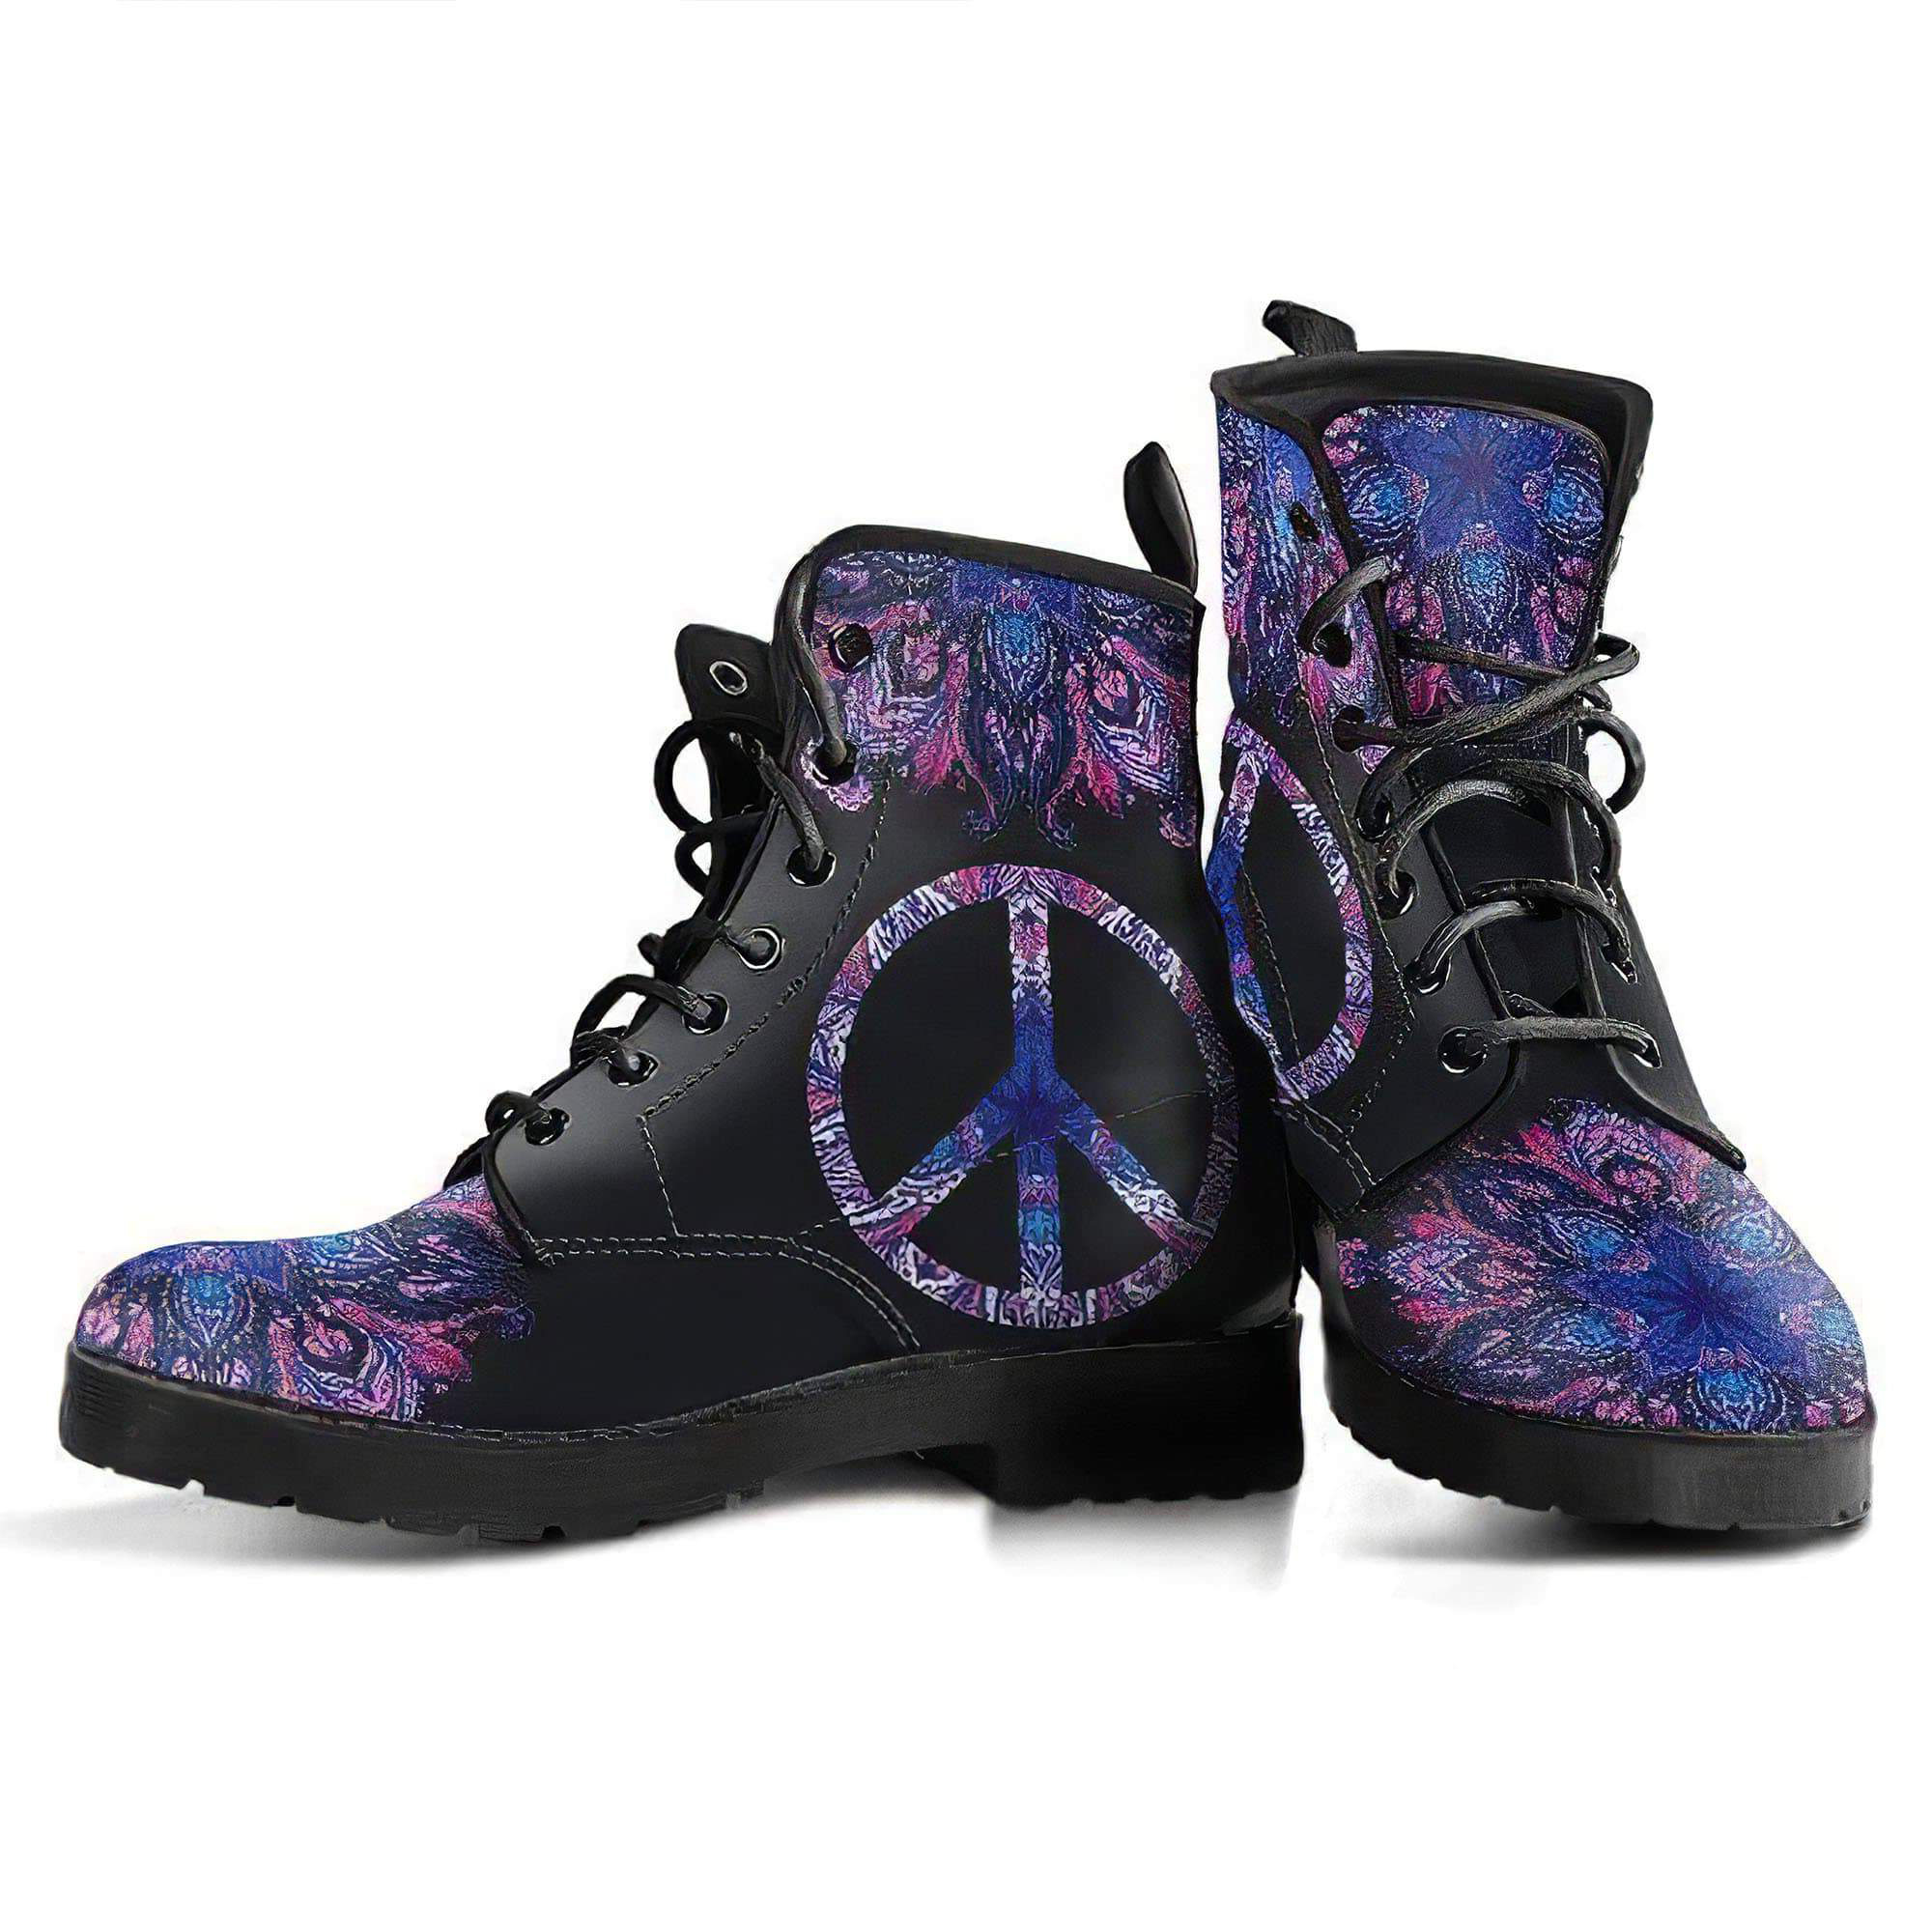 peace-mandala-handcrafted-boots-women-s-leather-boots-12051927859261.jpg